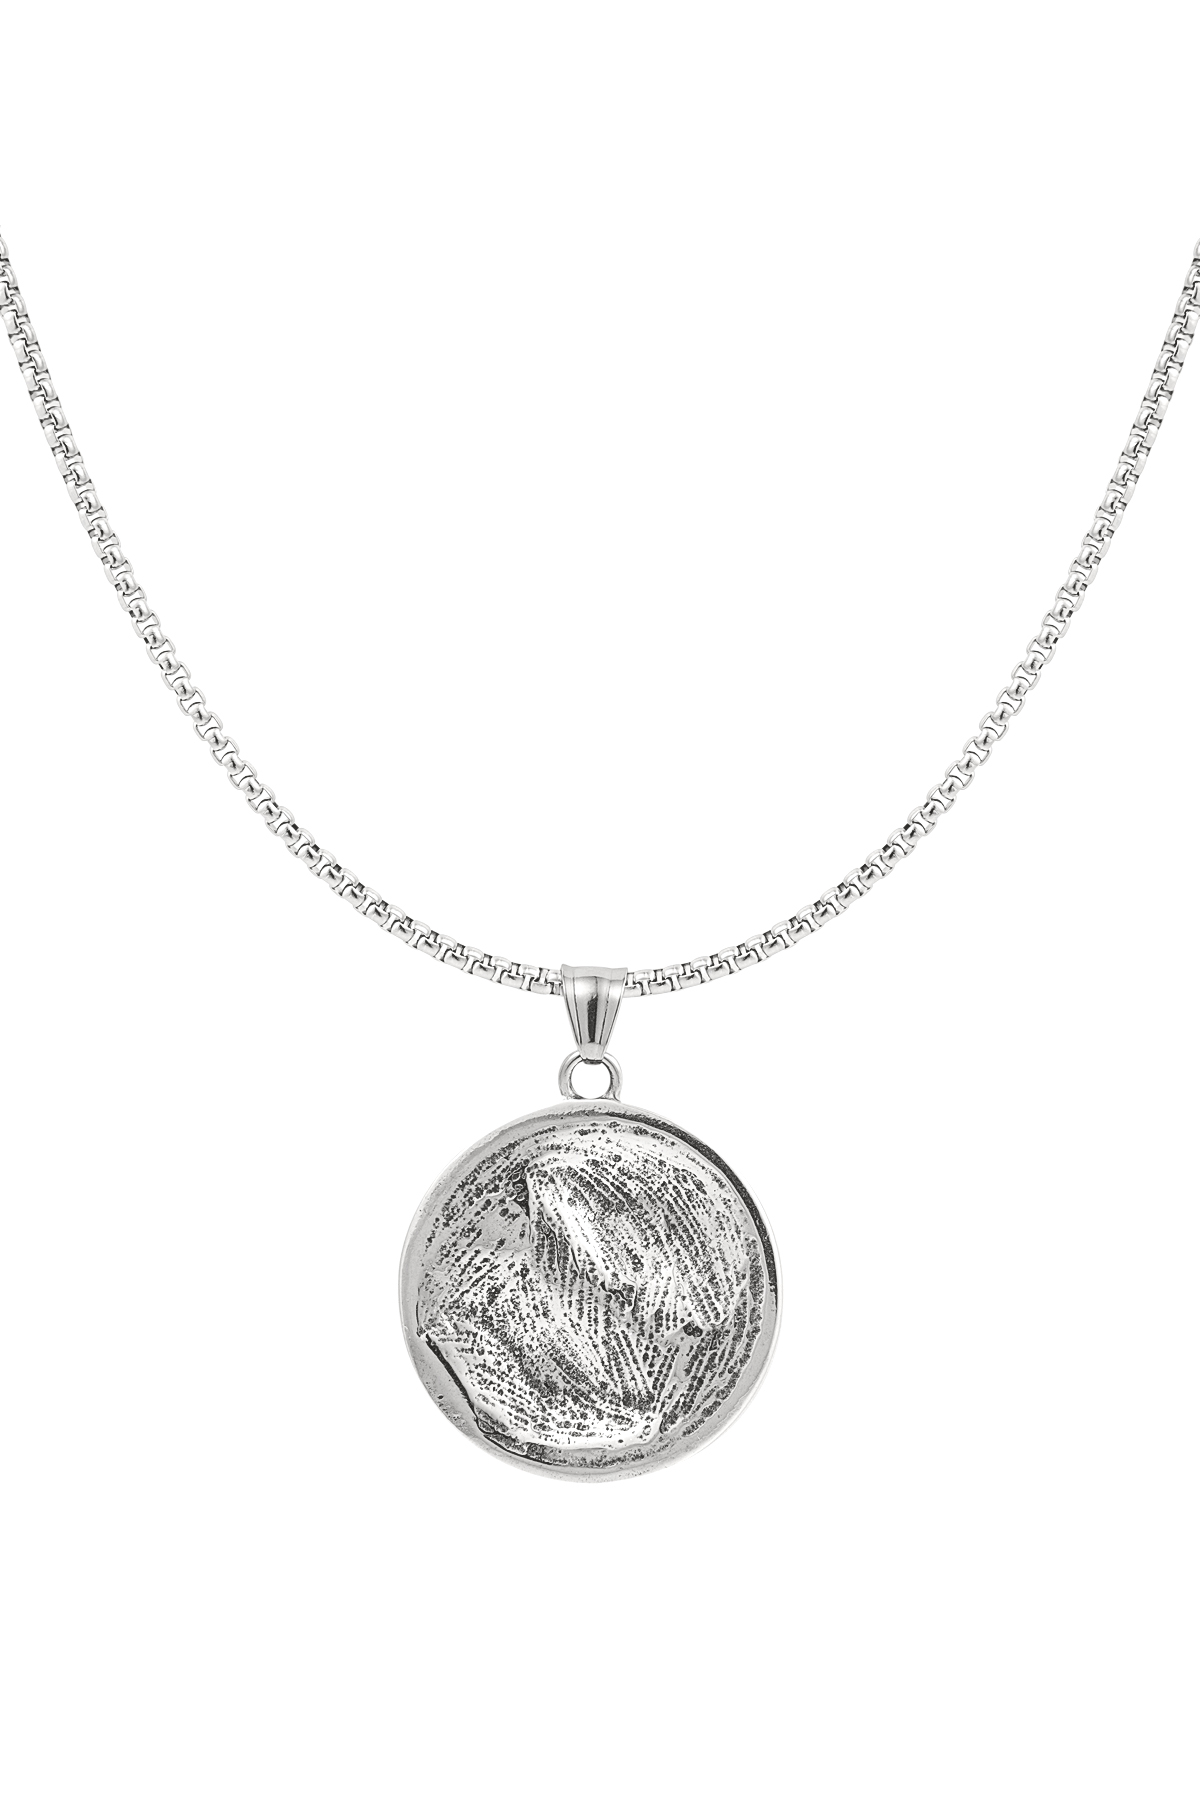 Men's necklace tiger coin - silver h5 Picture6